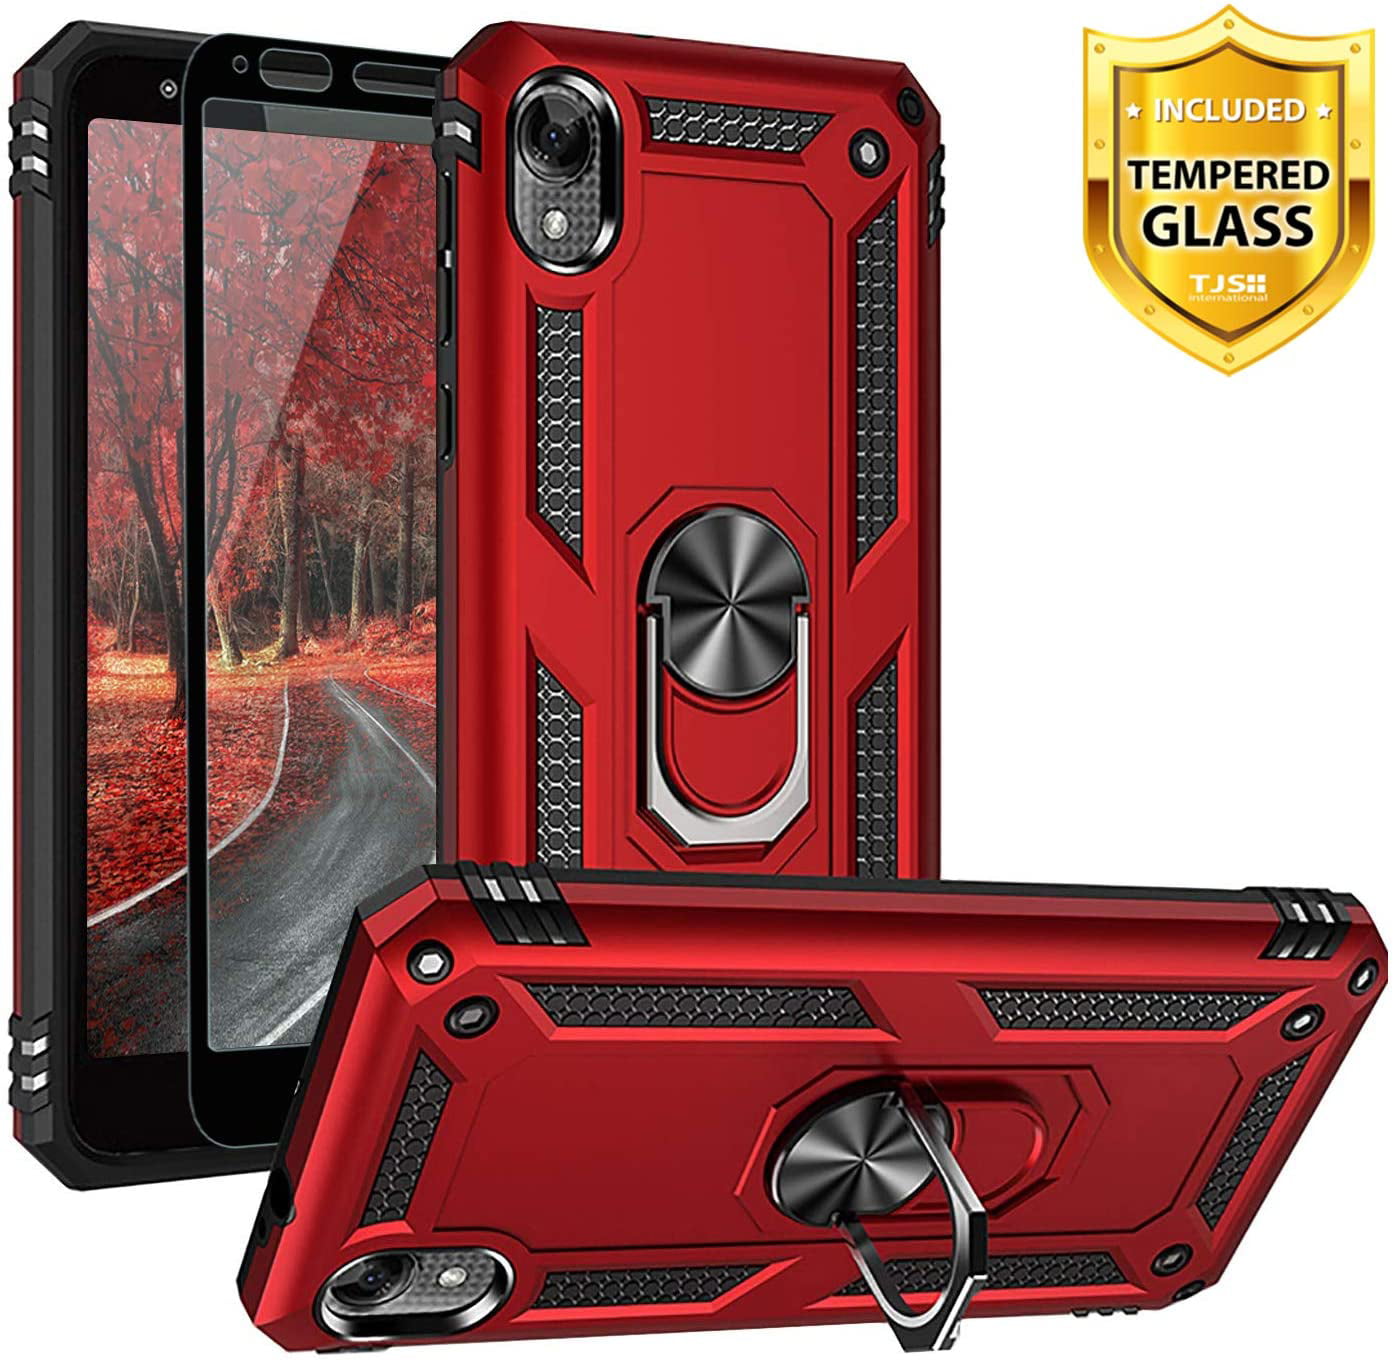 TJS Phone Case for Motorola Moto E6, [Full Coverage Tempered Glass Screen Protector][Impact Resistant][Defender][Metal Ring][Magnetic][Support] Heavy Duty Armor Phone Cover (Red)